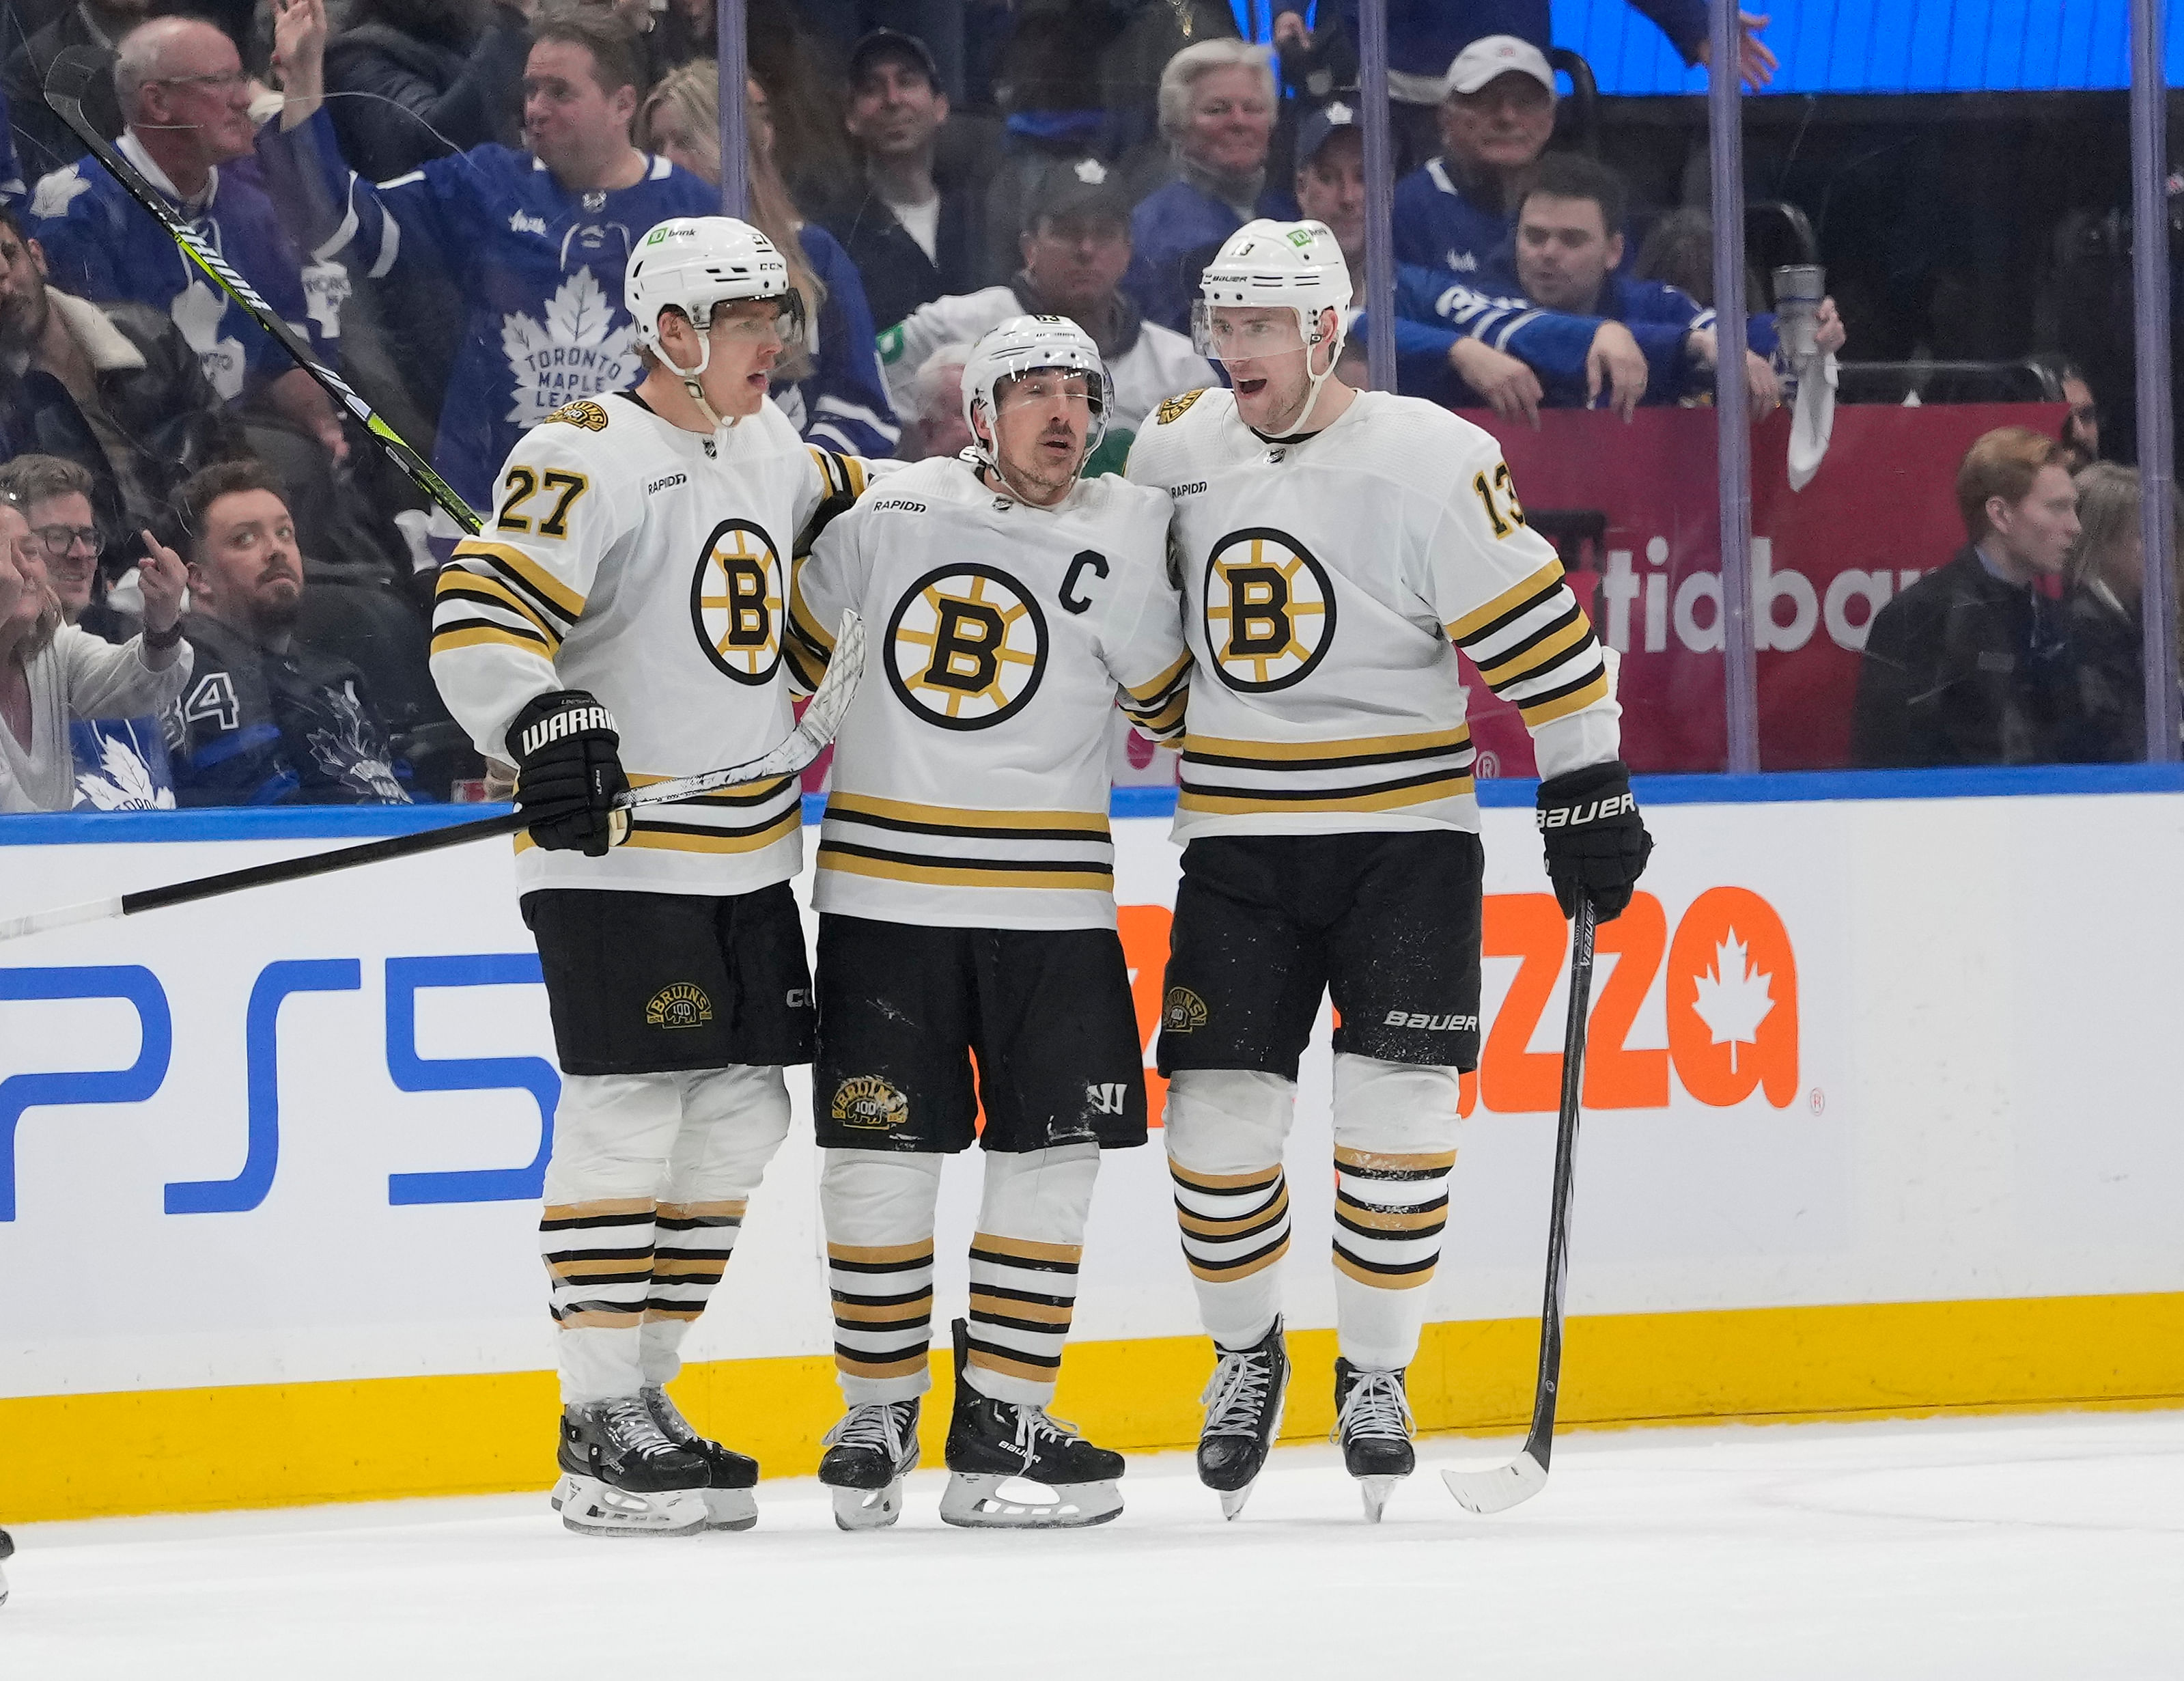 NHL: Stanley Cup Playoffs - Bruins at Toronto Maple Leafs